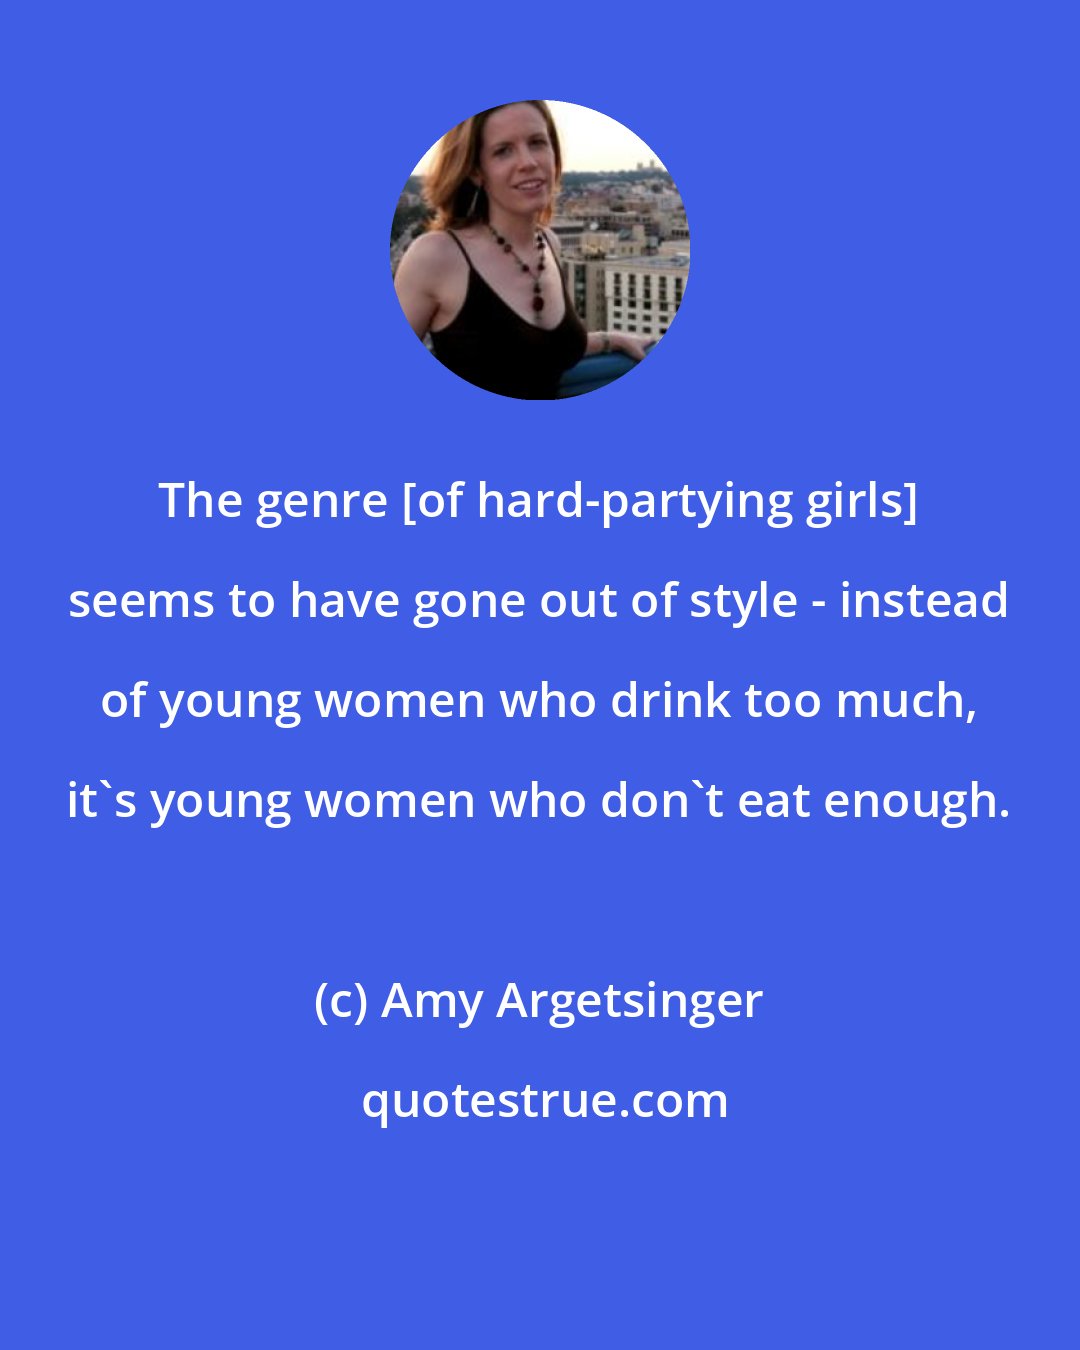 Amy Argetsinger: The genre [of hard-partying girls] seems to have gone out of style - instead of young women who drink too much, it's young women who don't eat enough.